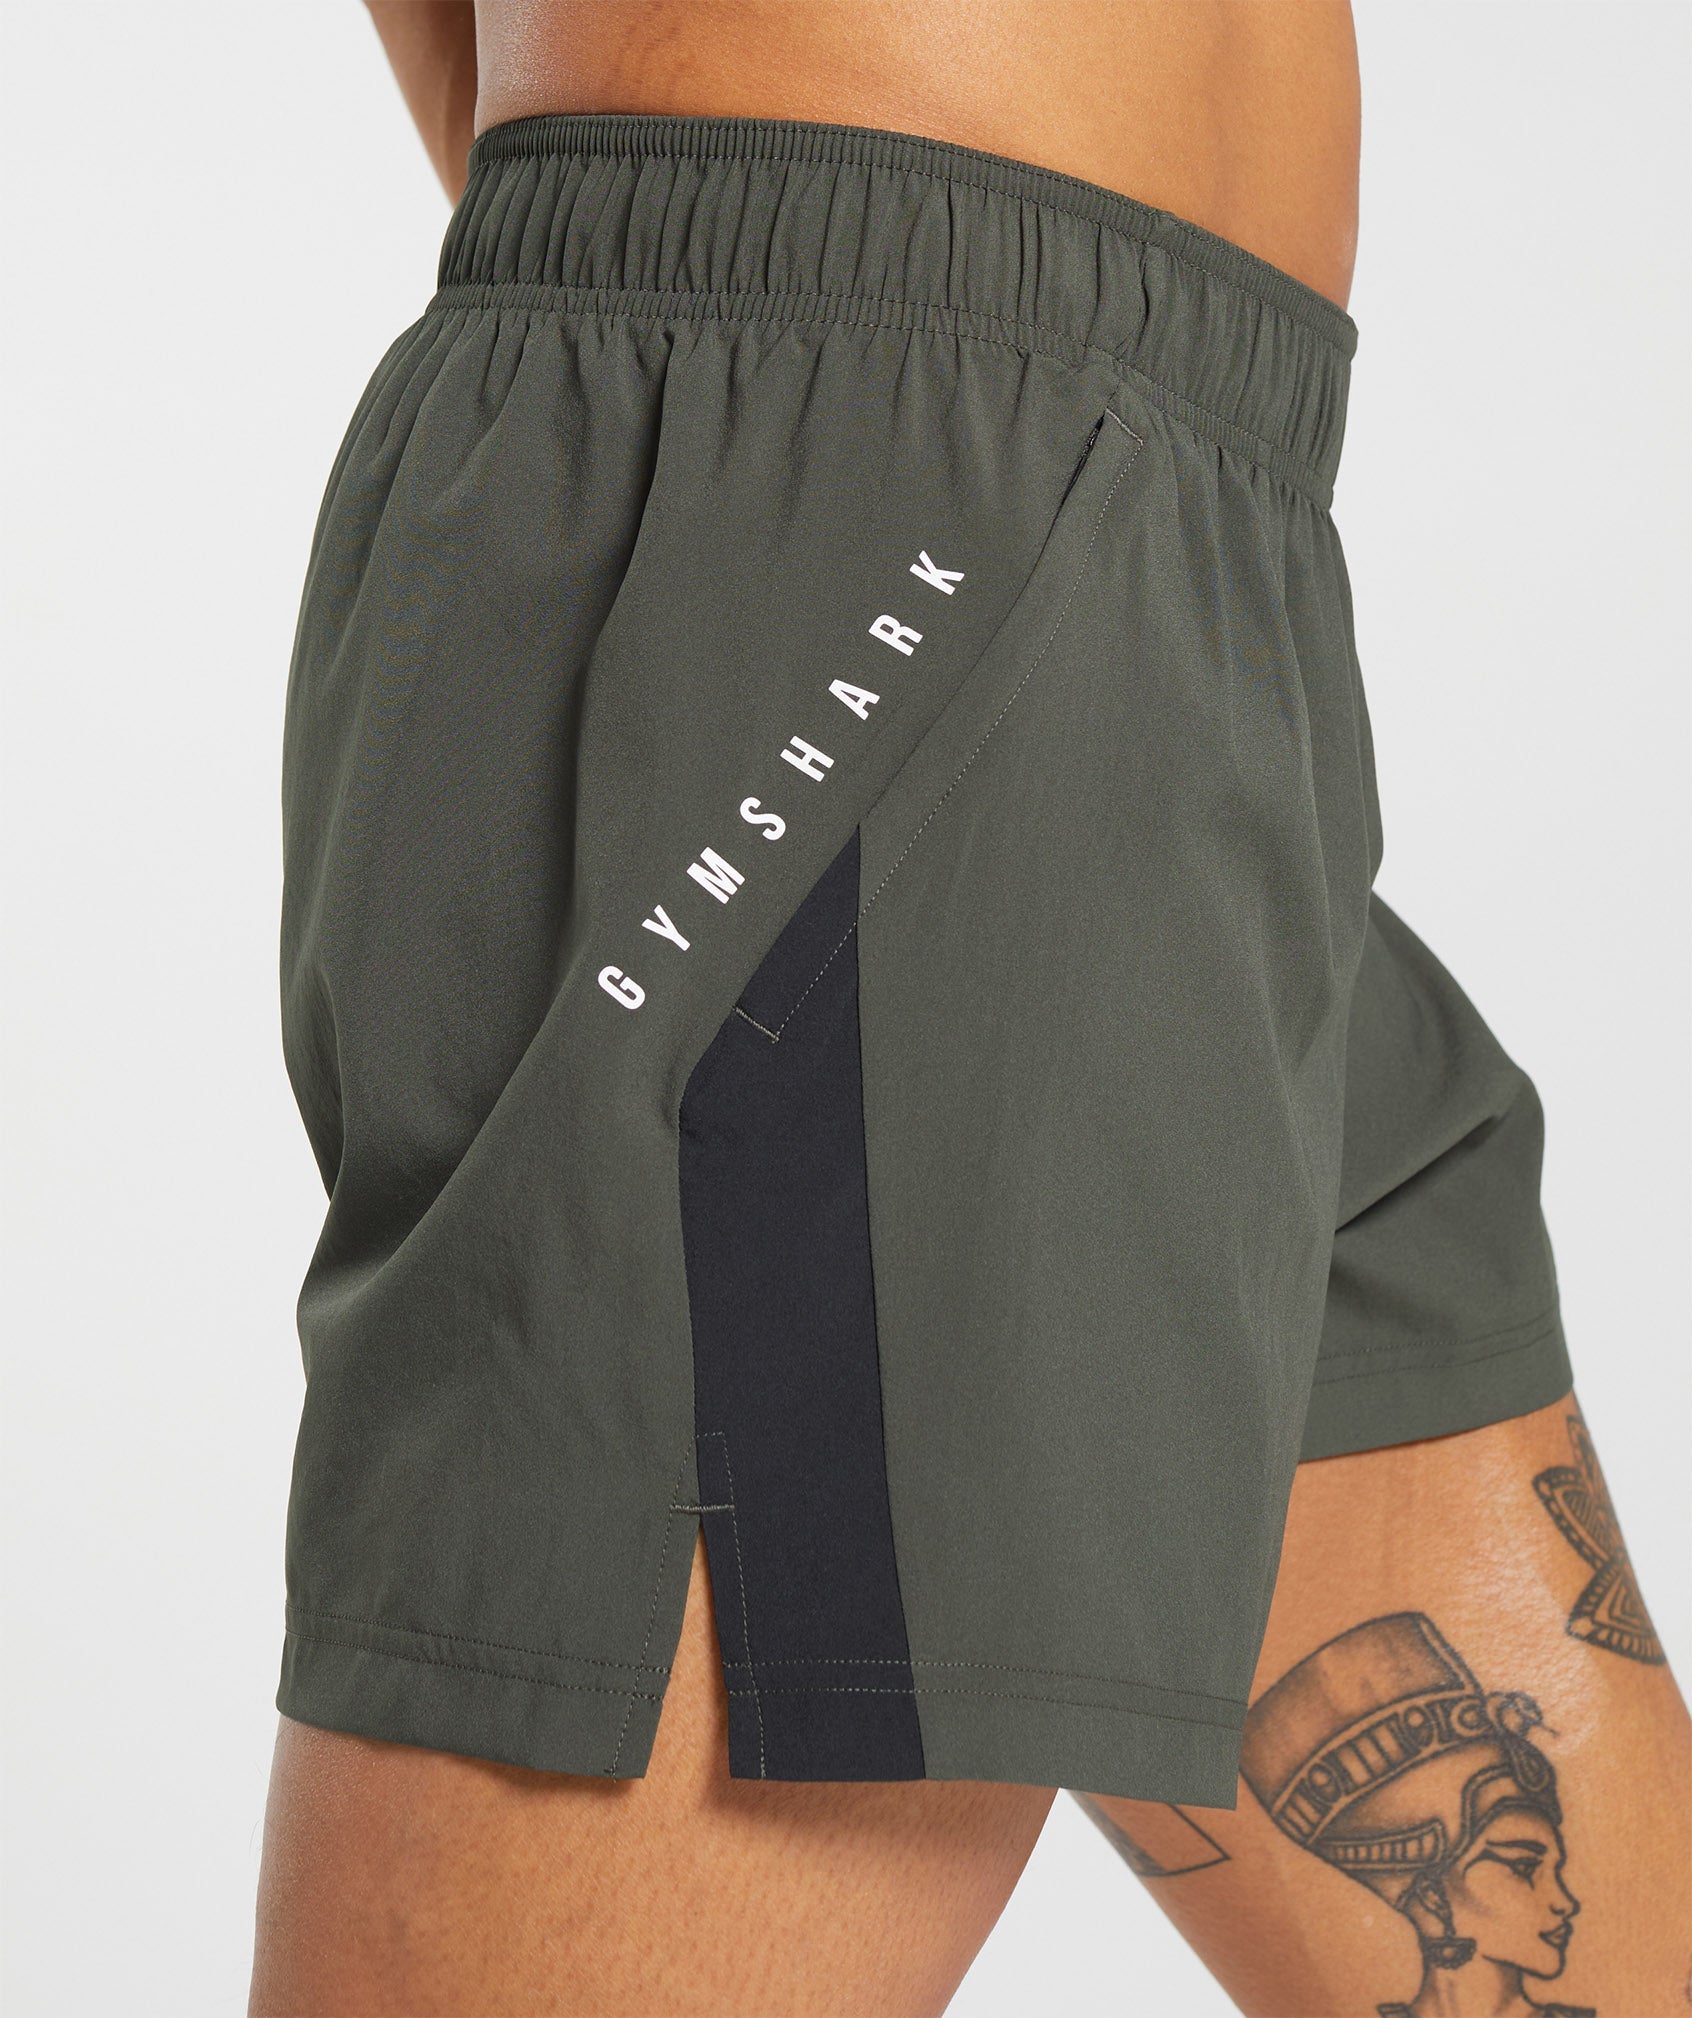 Sport 5" Shorts in Strength Green/Black - view 7